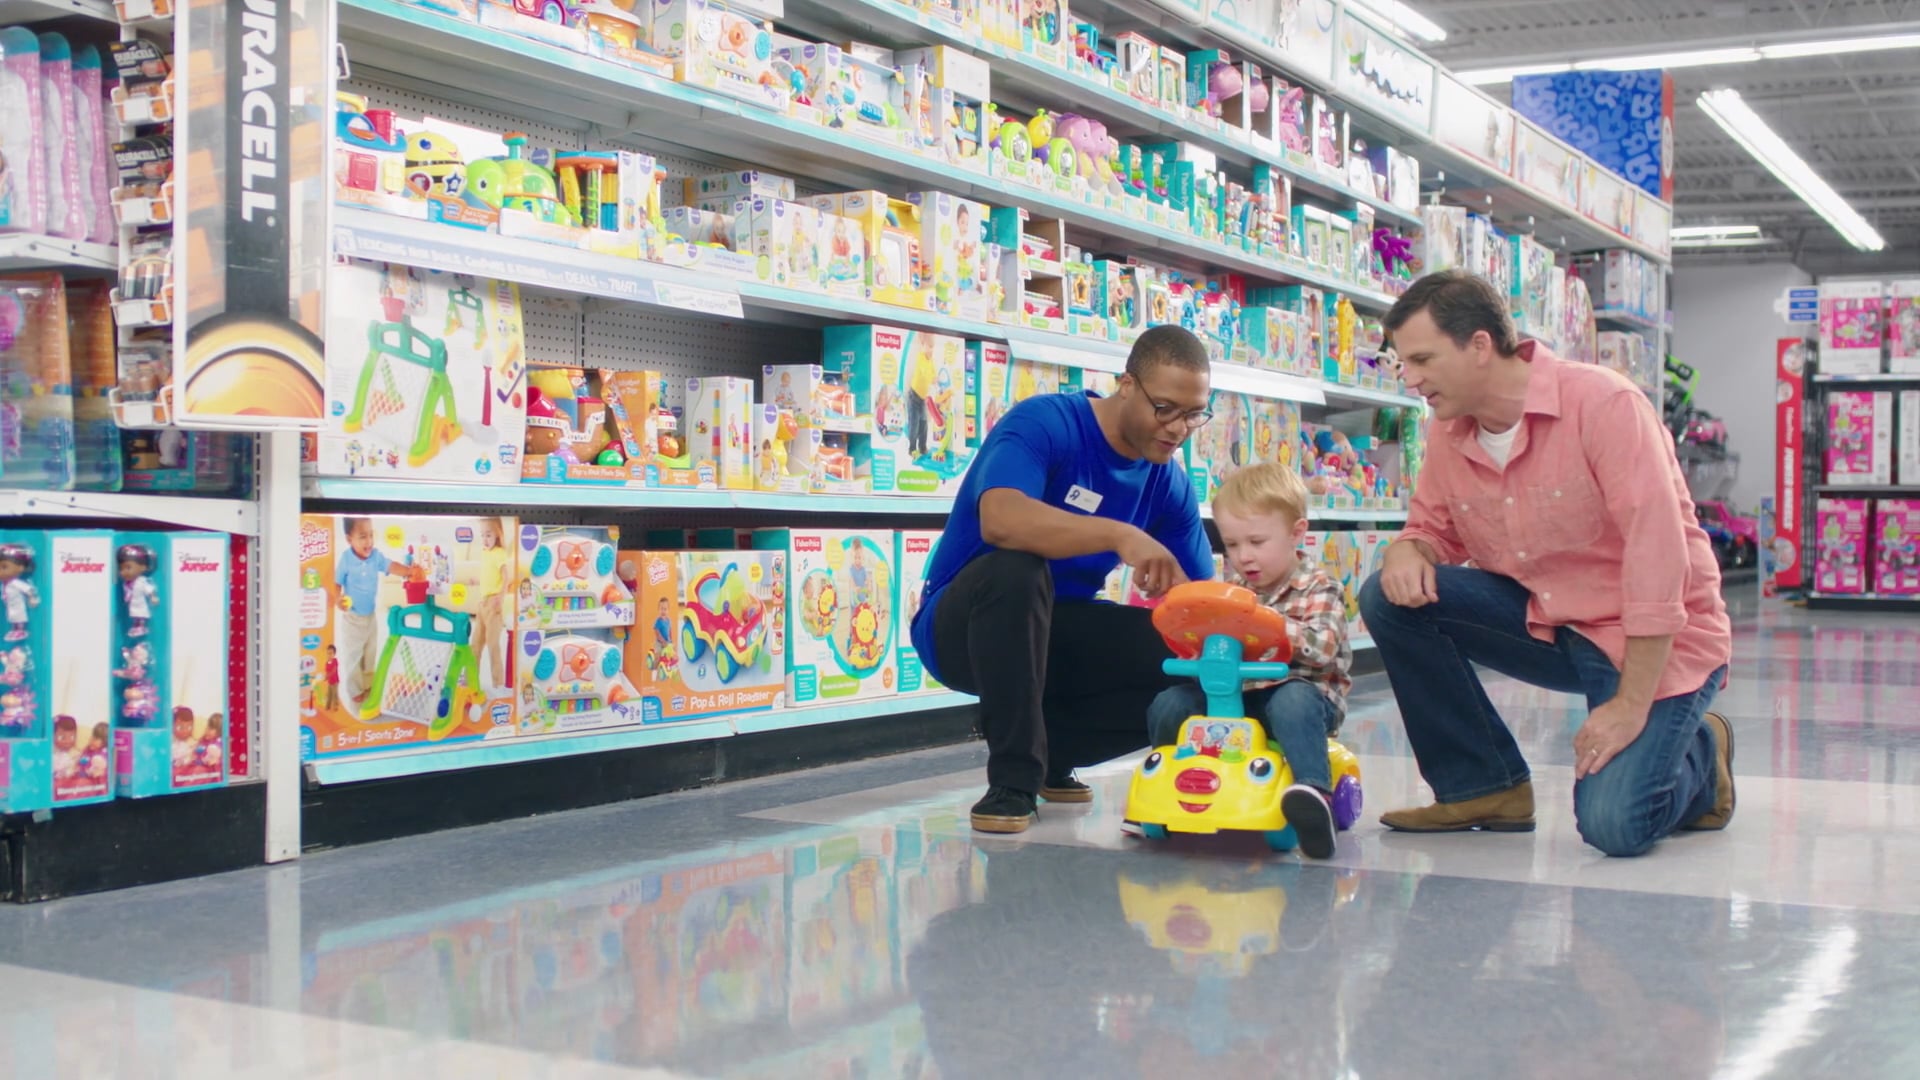 Slik Intuition præmedicinering Toys"R"Us - Sit to Stand Cruiser on Vimeo